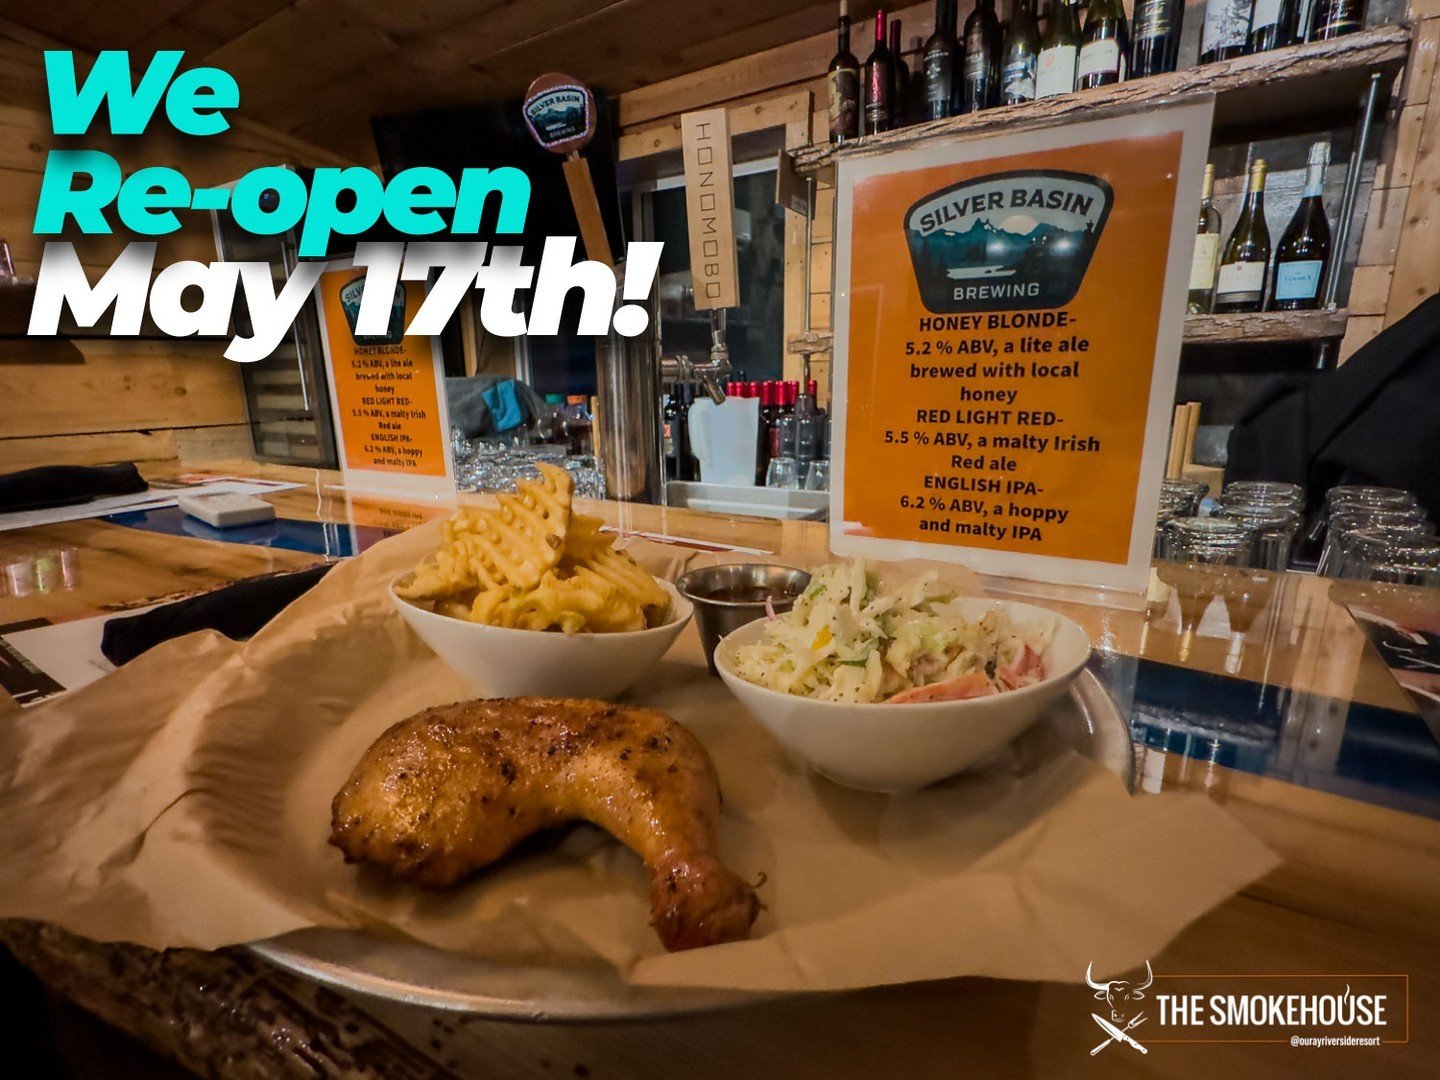 The wait is OVER! We're thrilled to be back serving up deliciousness on May 17th. Join us for breakfast, dinner, and those unbeatable mountain views on our patio. Or grab your favorites to go! #smokehouse #RidgwayEats #alfrescodining #ouraycolorado